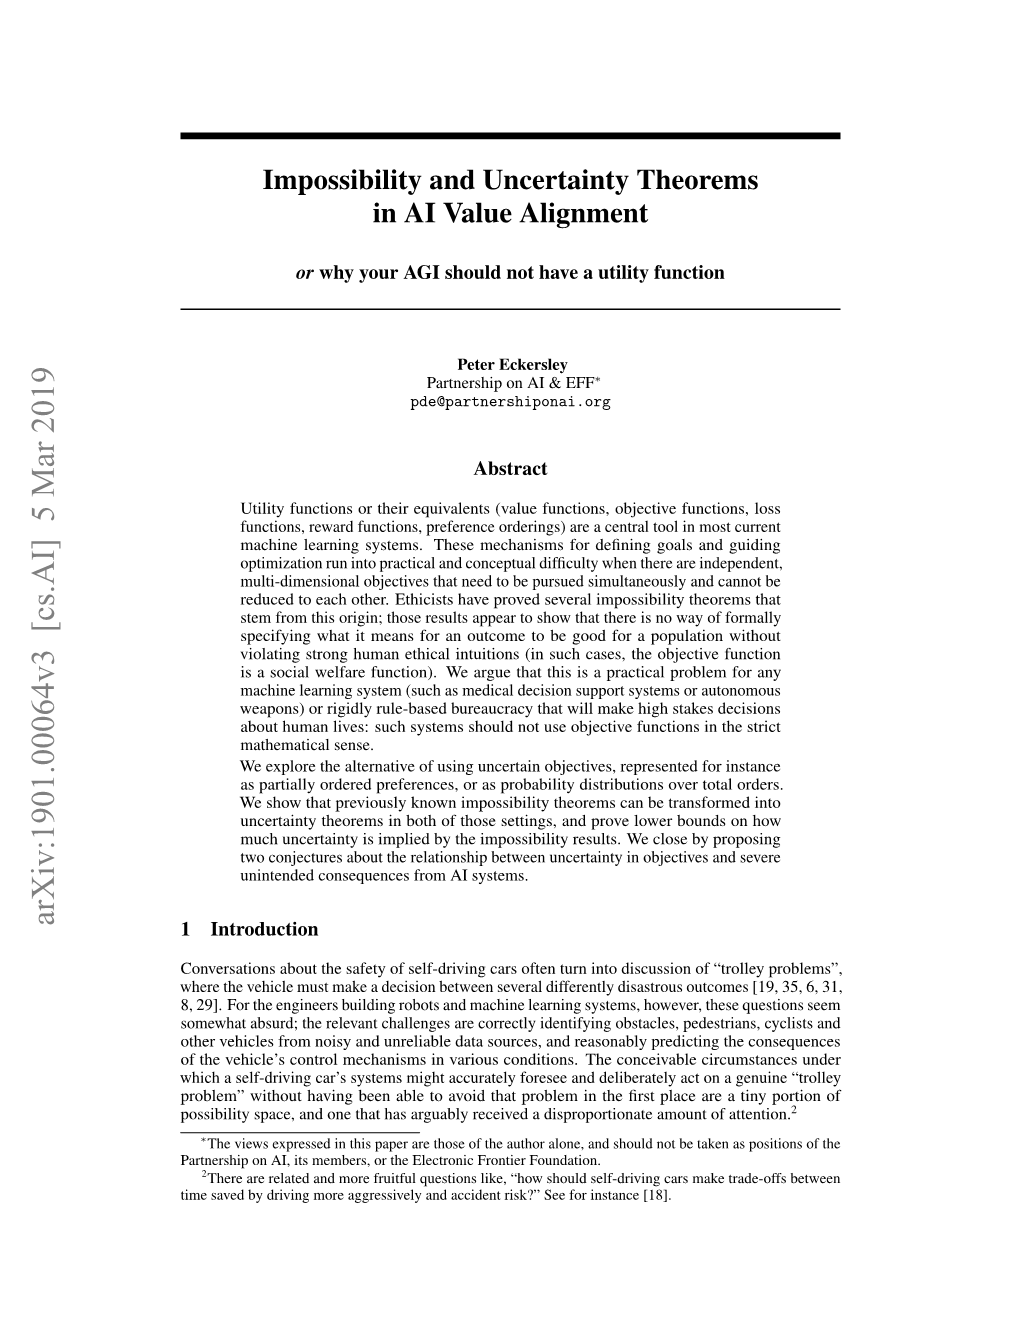 Impossibility and Uncertainty Theorems in AI Value Alignment